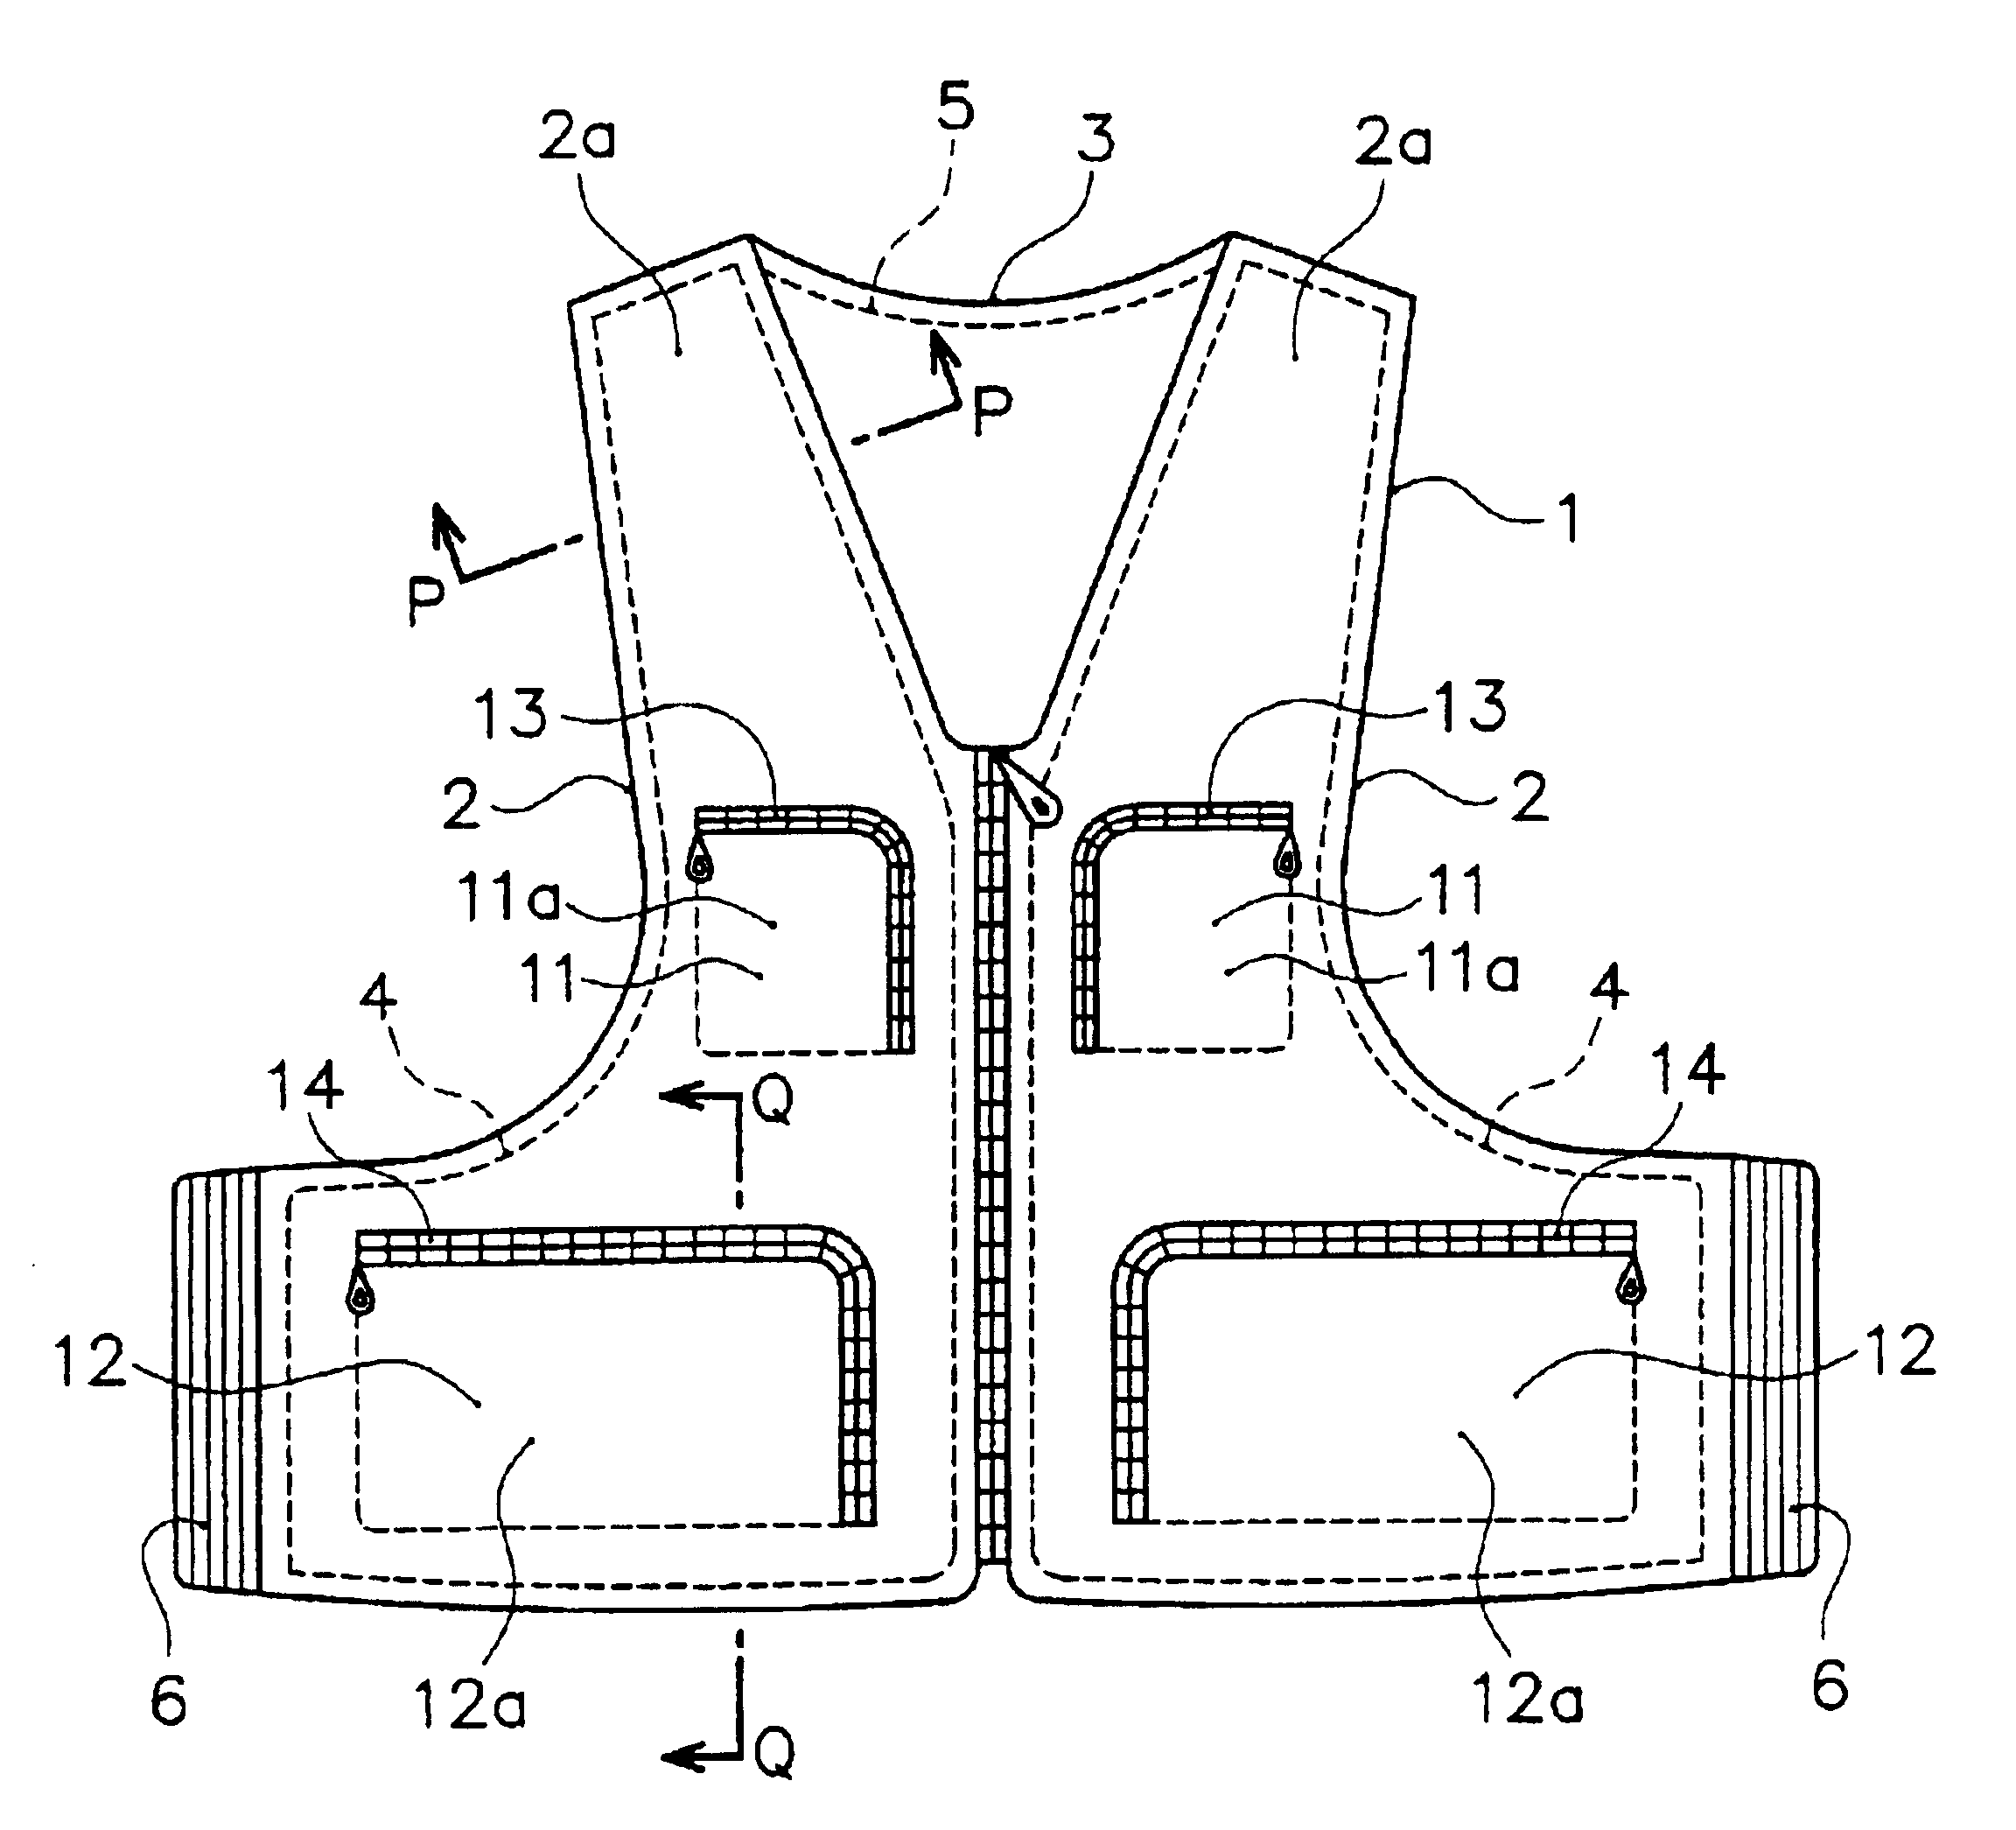 Article of clothing with buoyant material